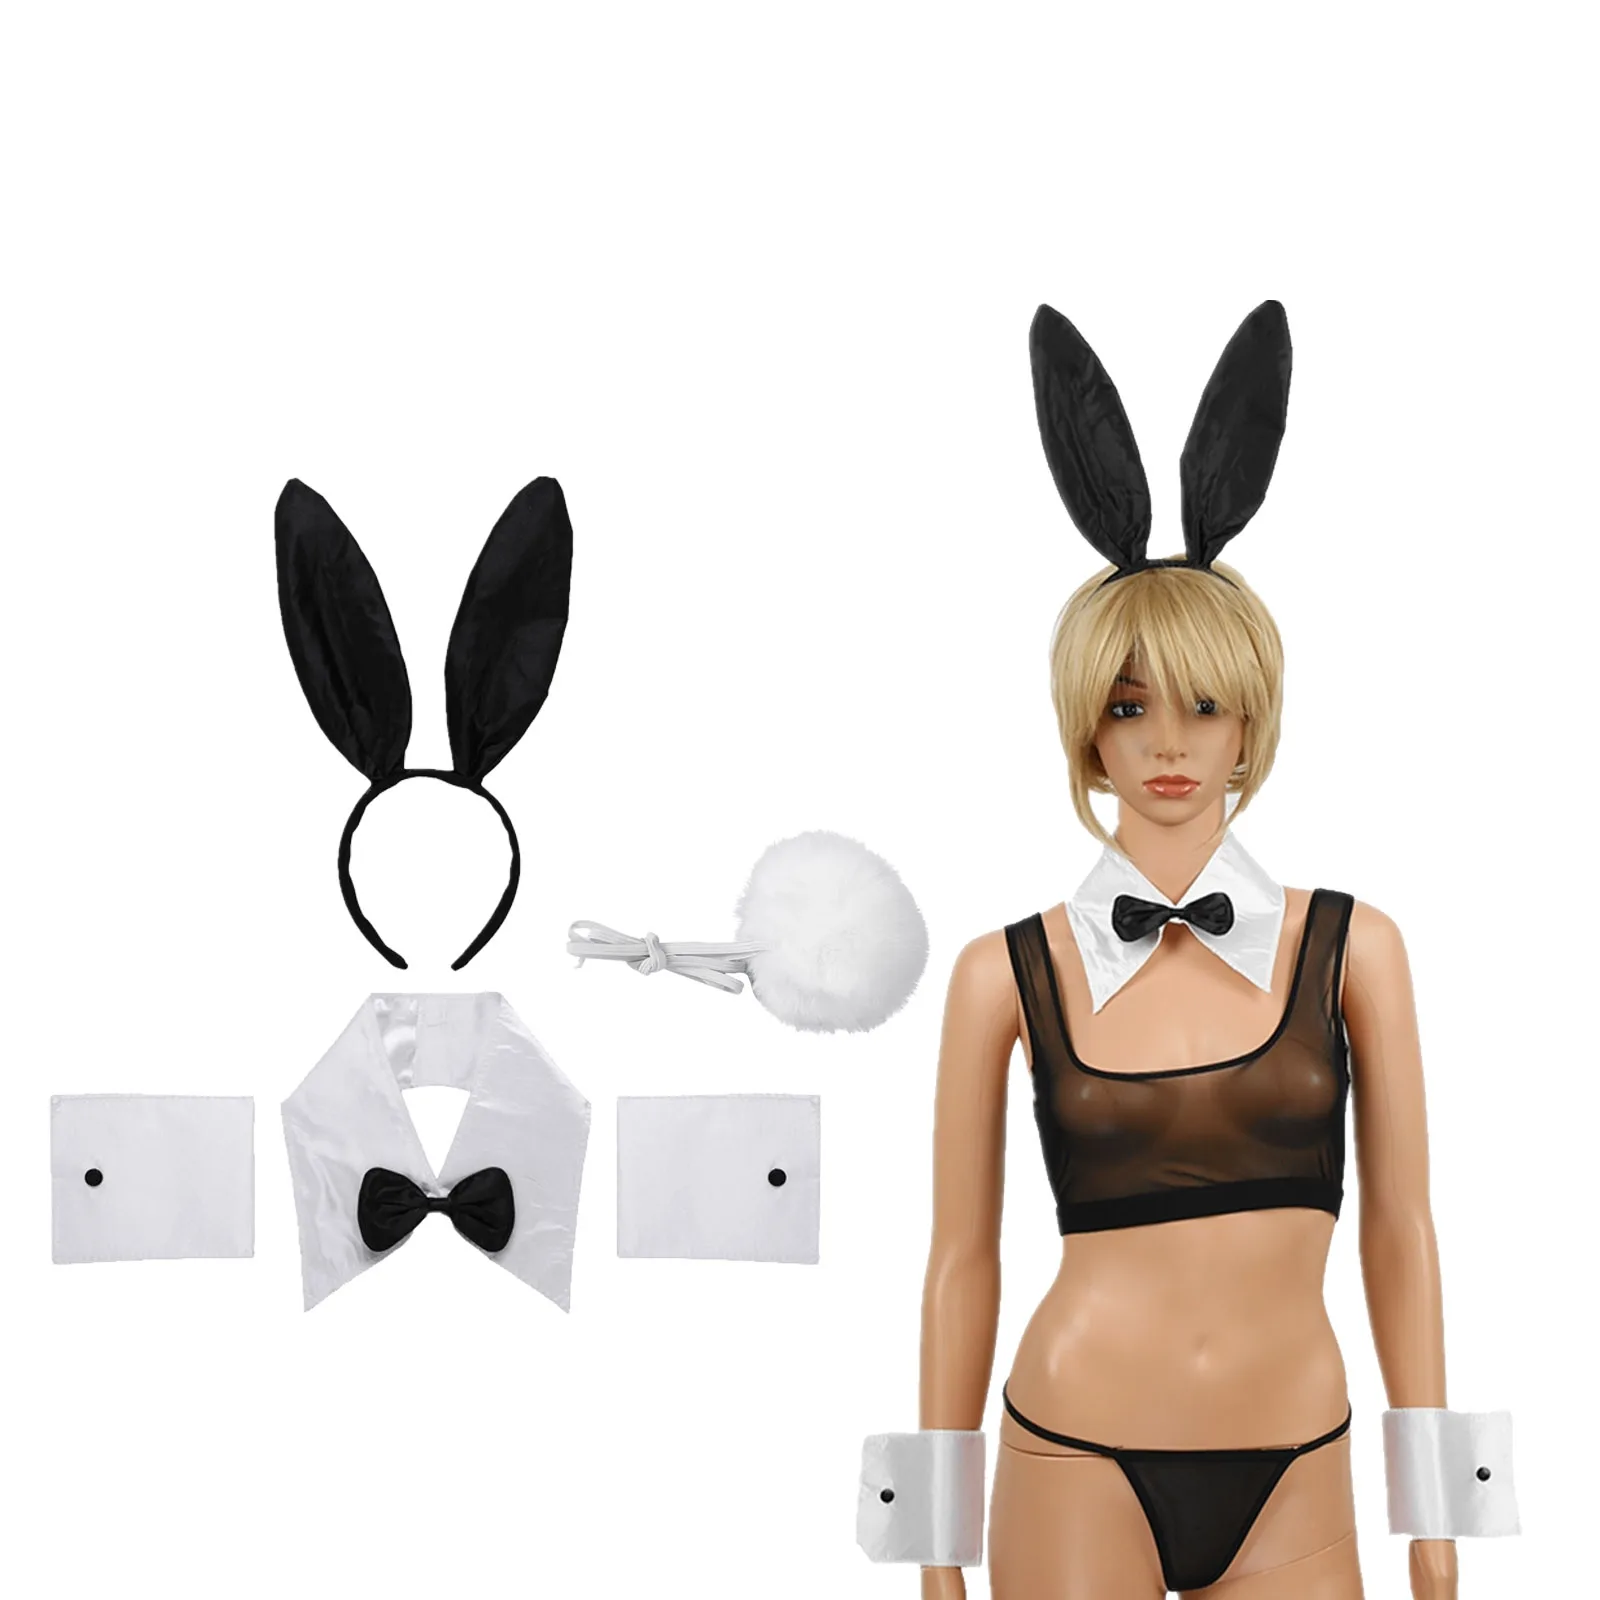 anime outfits Women Bunny Costume Accessory Set Sexy Role Play Outfits Rabbit Ear Headband Collar Bow Tie Cuffs Tail Skirt for Halloween Party ninja costume women